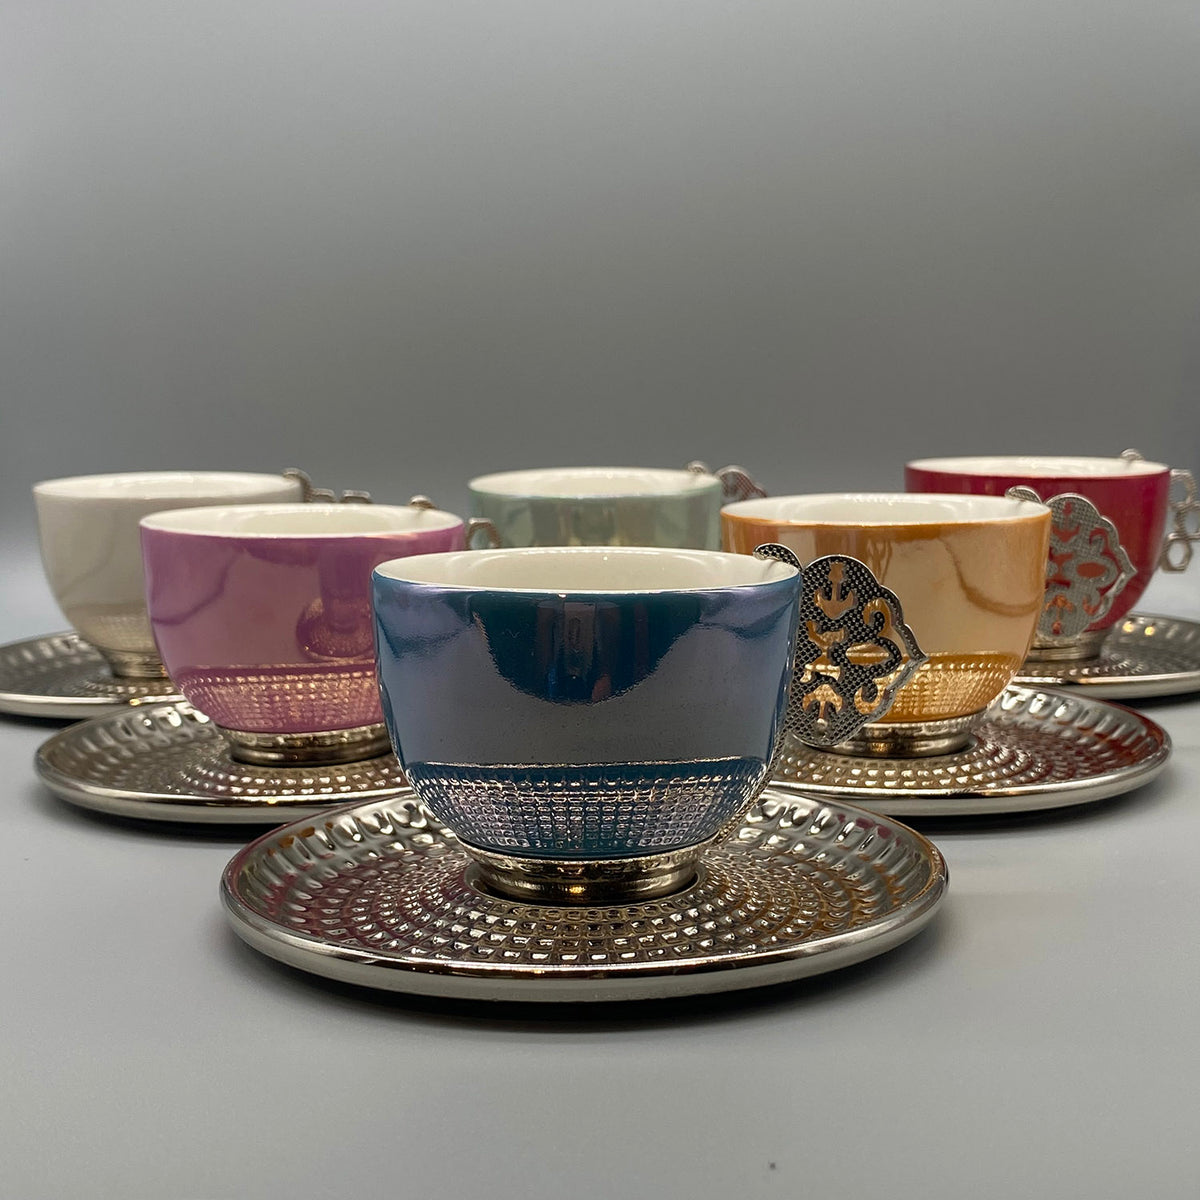 Luxury Ceramic Coffee Cups And Saucers By QJJ60BYD Unbreakable European  Chavenas De Cafe For Daily Use. From Liuliumayy, $64.53